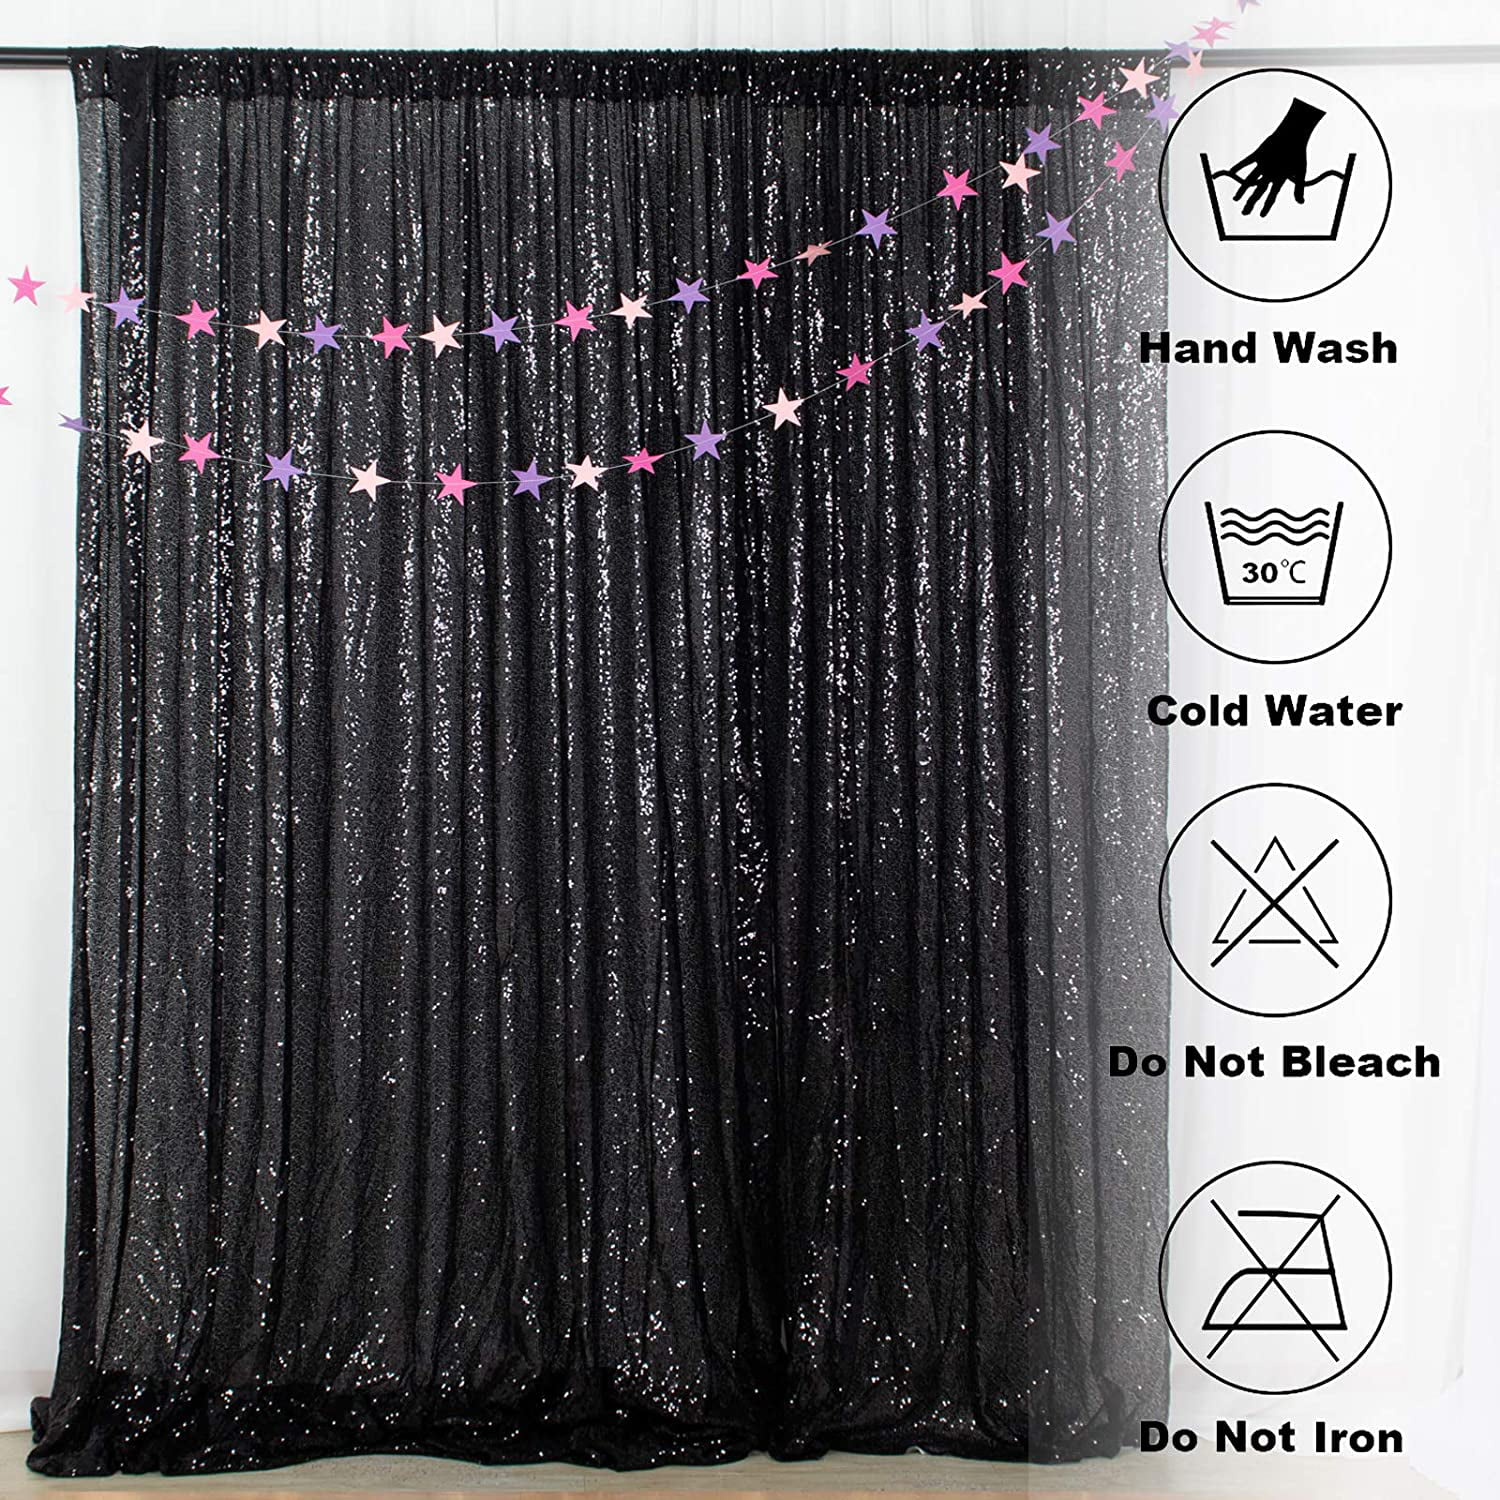 Sequin Curtain-2x3FT,Sequin Fabric Photography Backdrop,Sparkly Curtain Wedding 